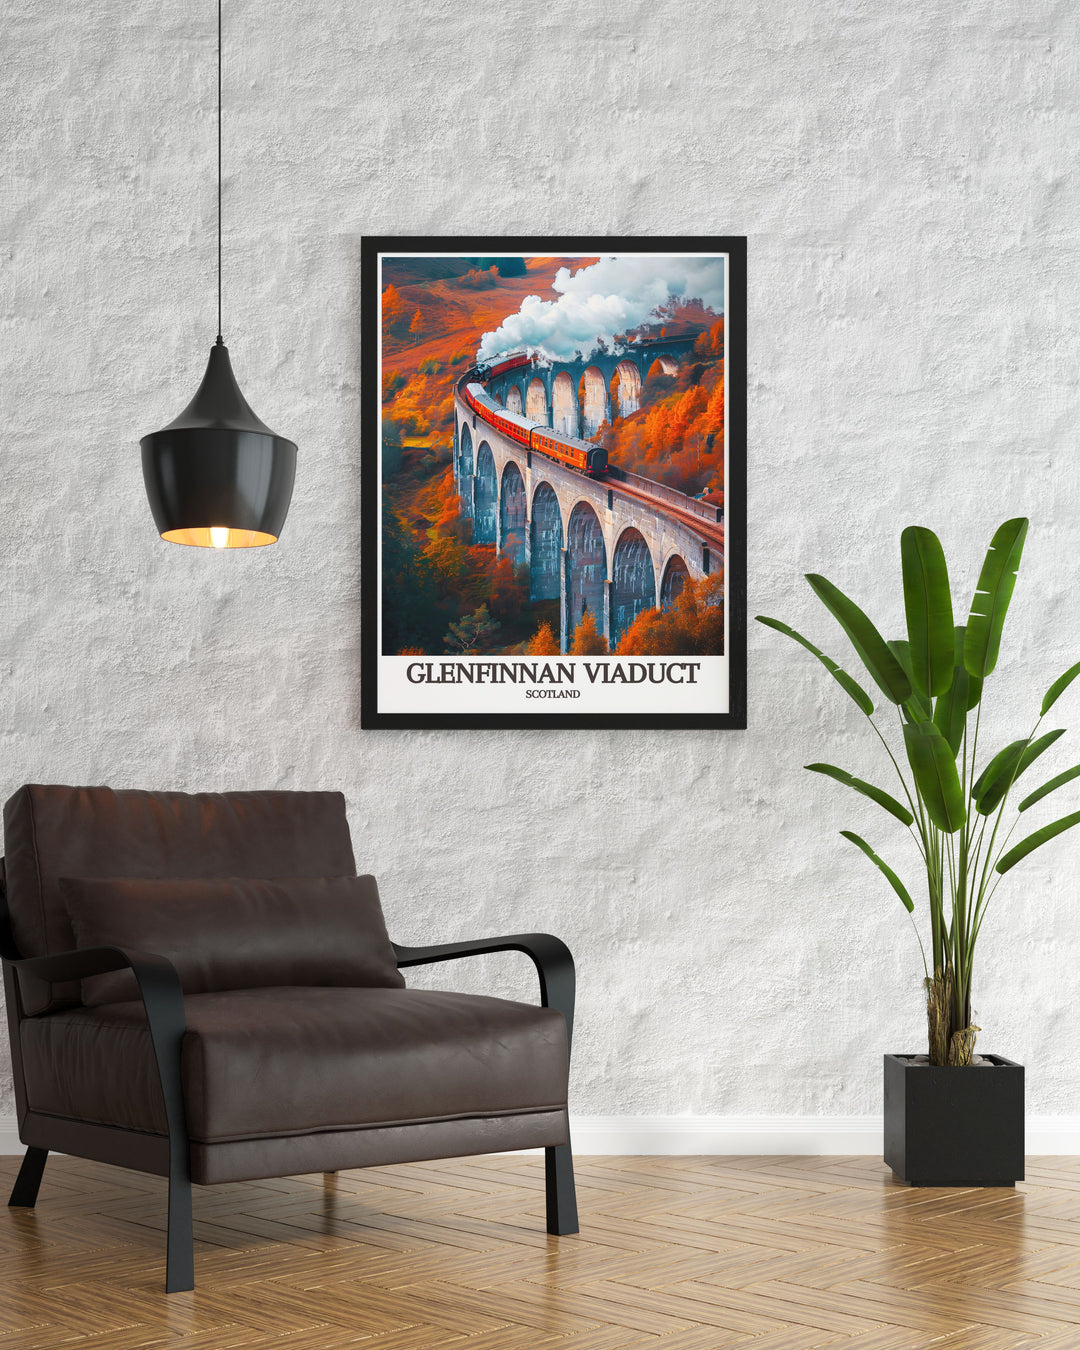 Gallery wall art of the Glenfinnan Viaduct in Scotland, capturing its majestic arches and stunning highland backdrop, perfect for enhancing your home with a touch of historic charm.